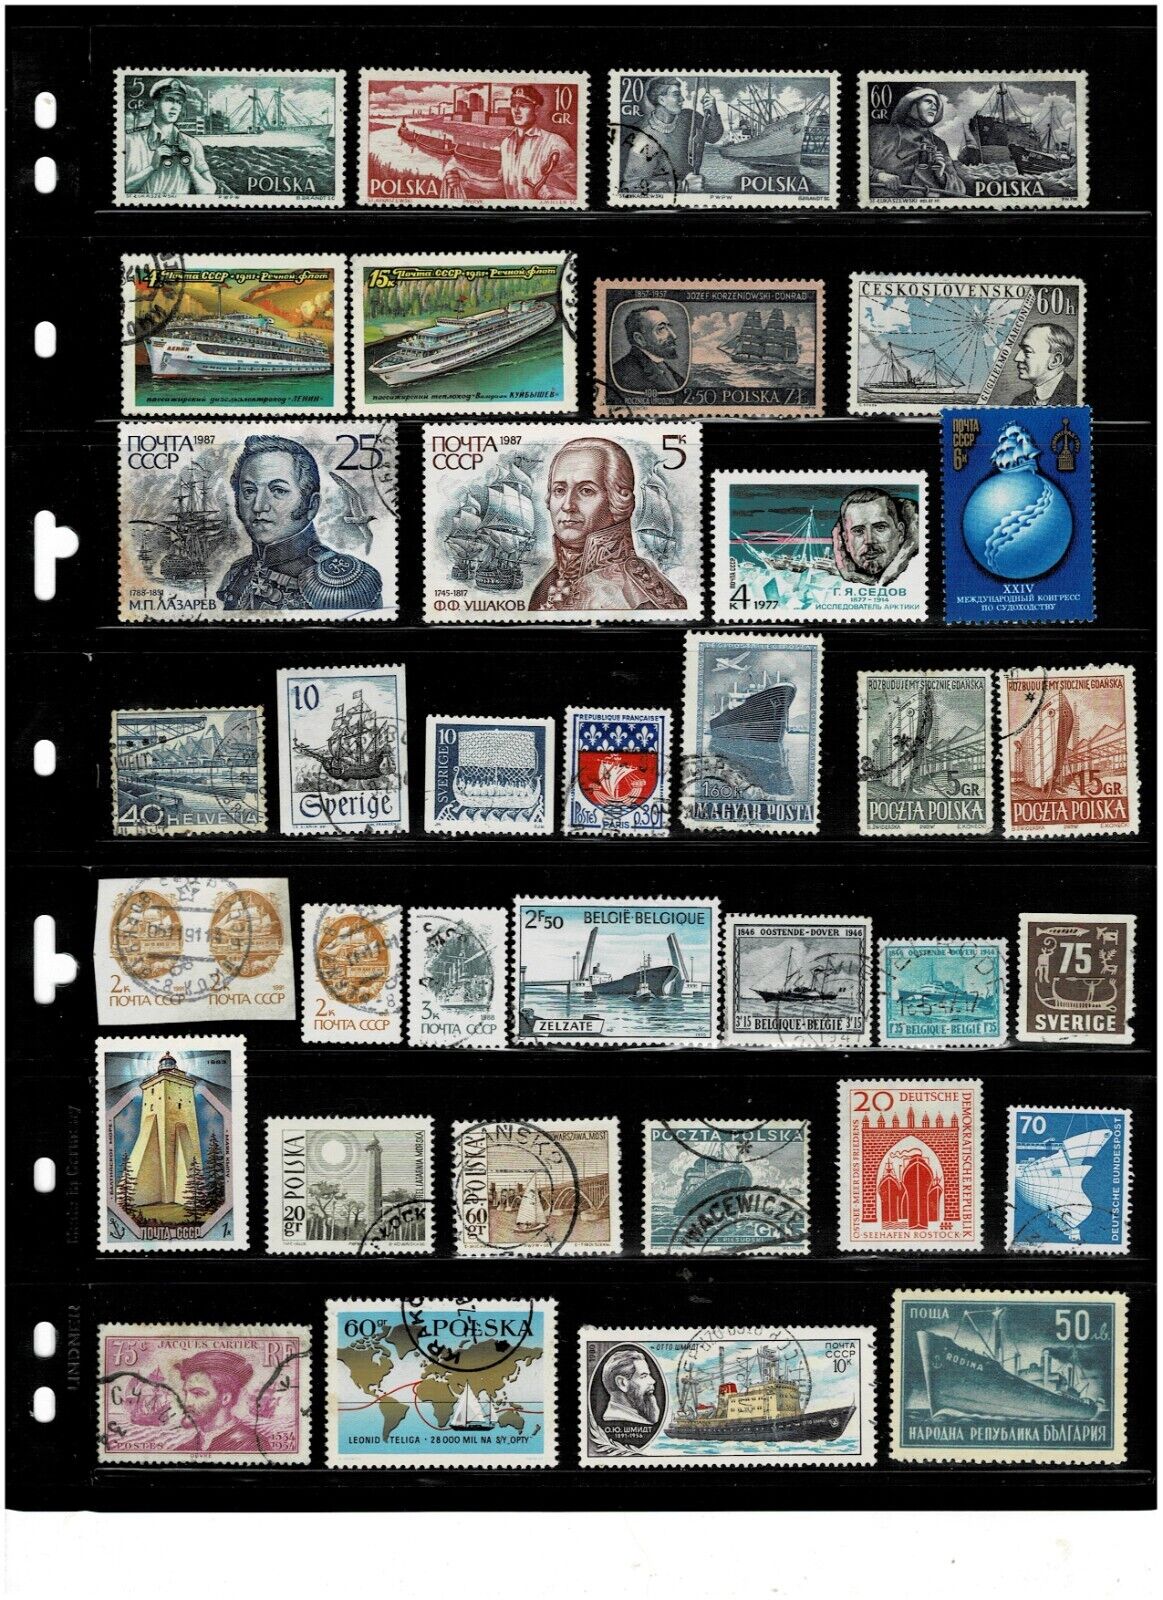 Ships On Stamps